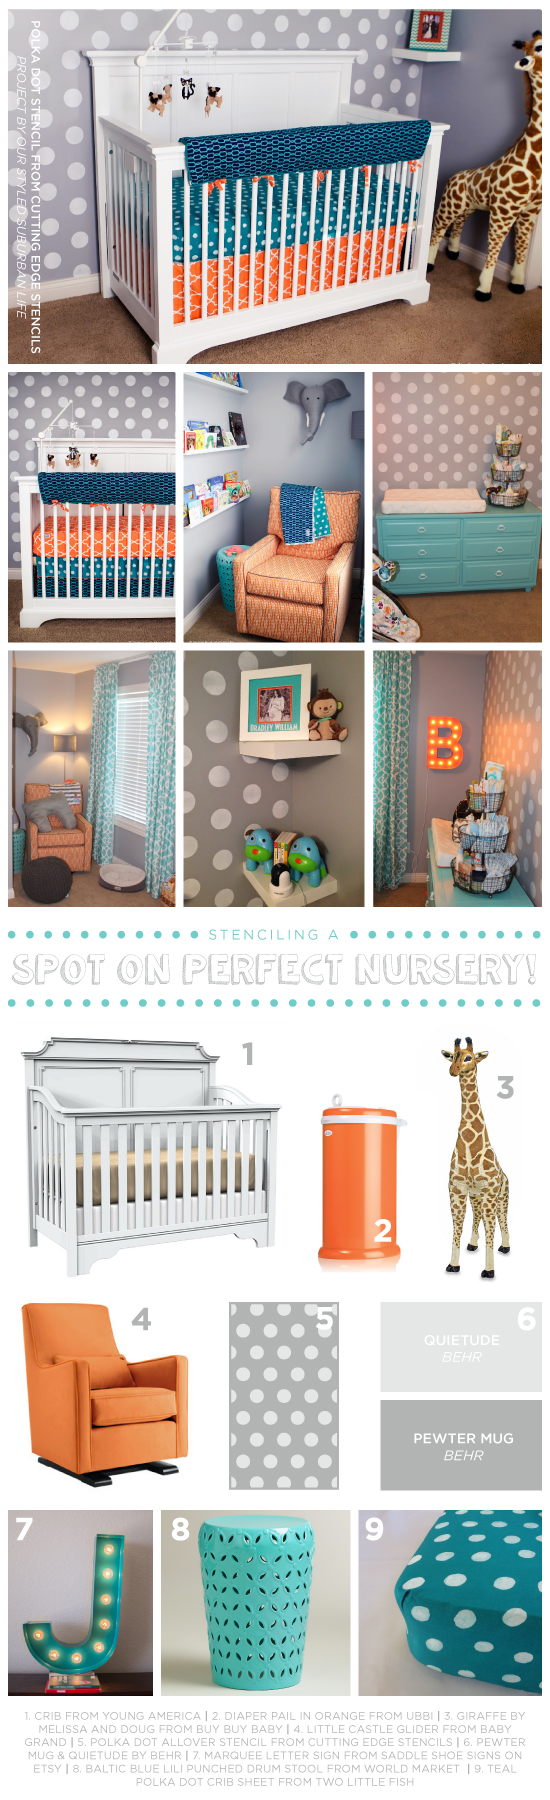 Steal the look of this Polka Dot stenciled nursery in gray with aqua and orange. http://www.cuttingedgestencils.com/polka-dots-stencils-nursery.html